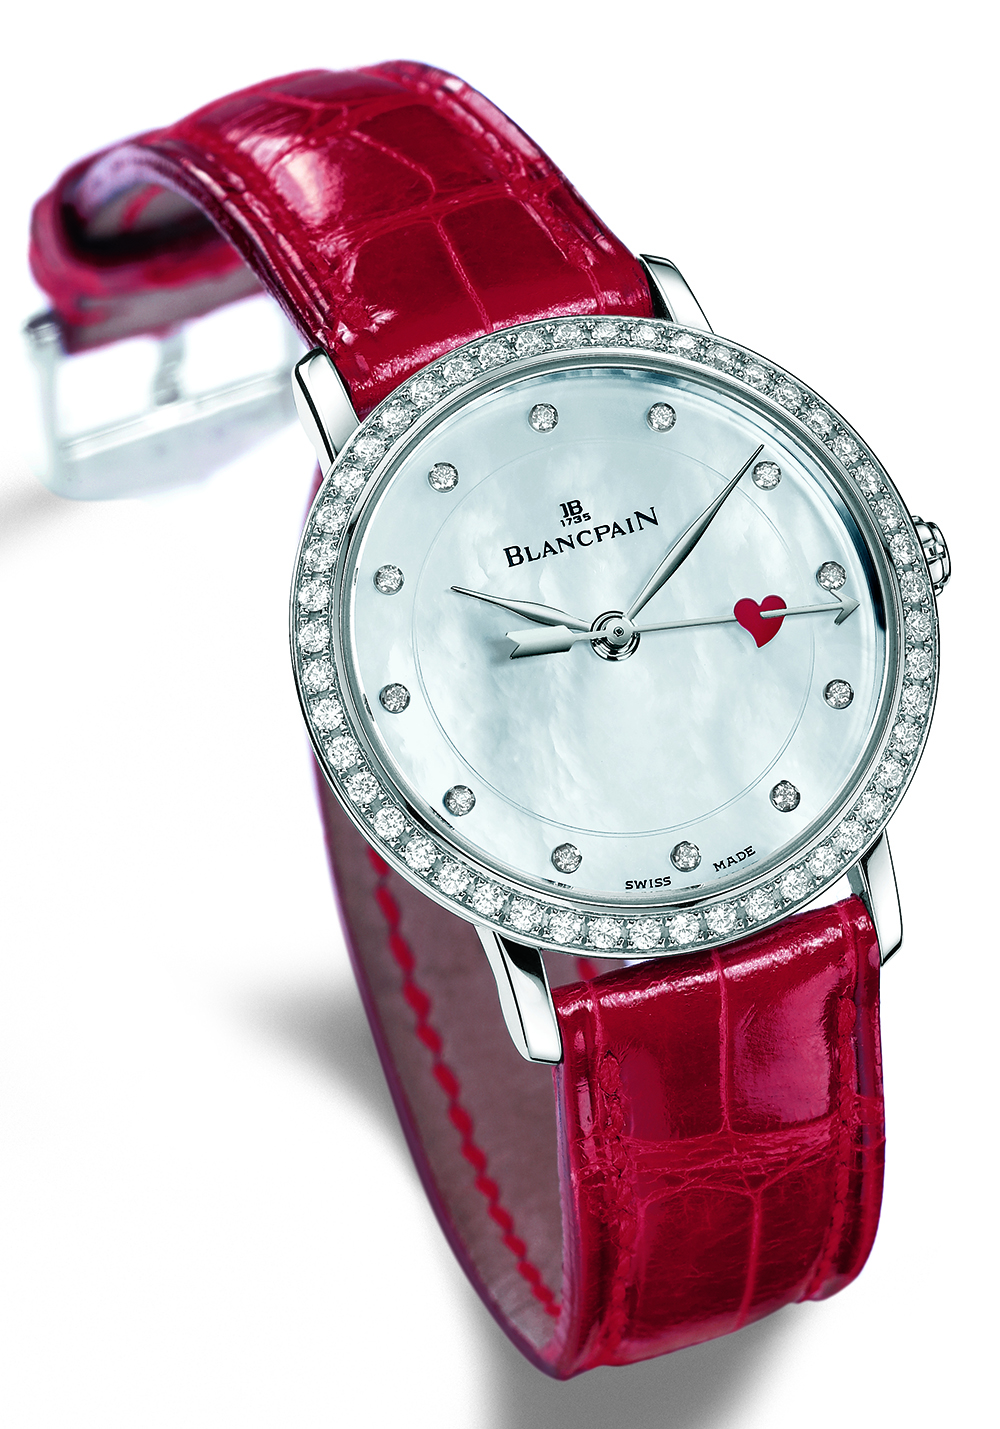 The 2004 version of the Blancpain St. Valentine’s Day Special Edition.